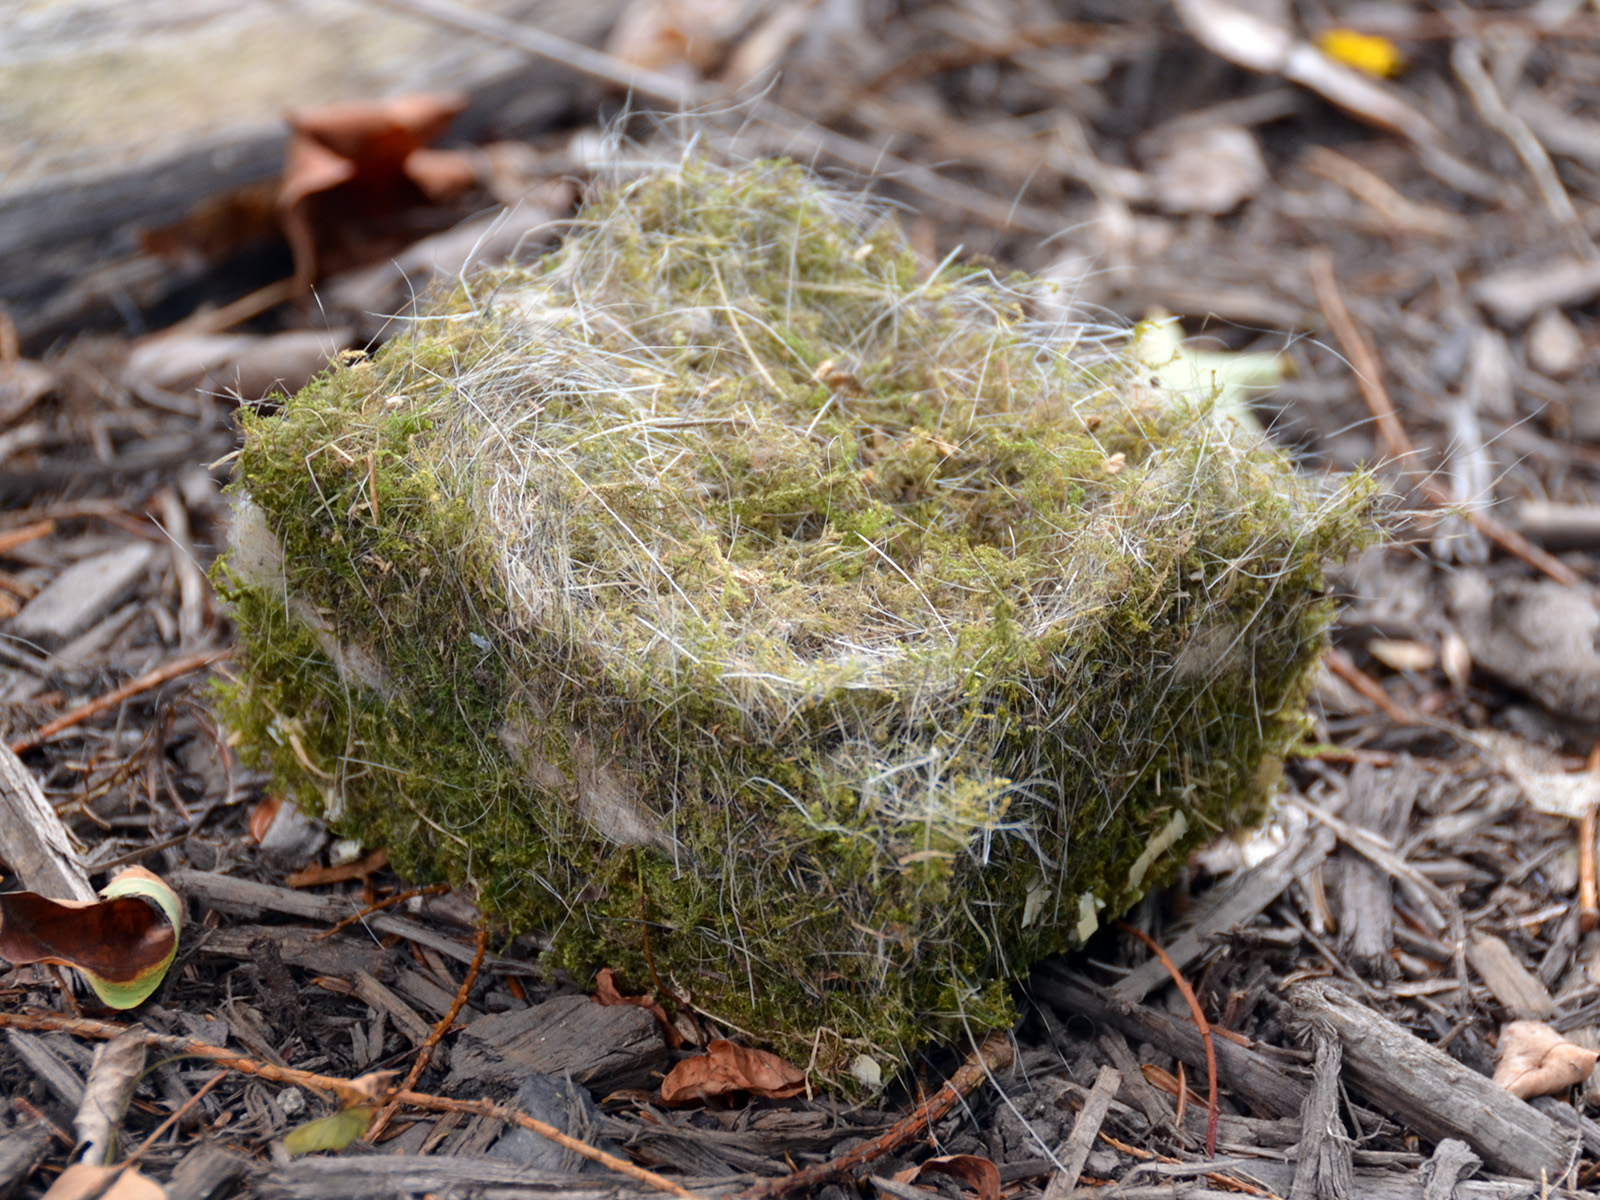 Chickadee nest showing squirrel fur and moss